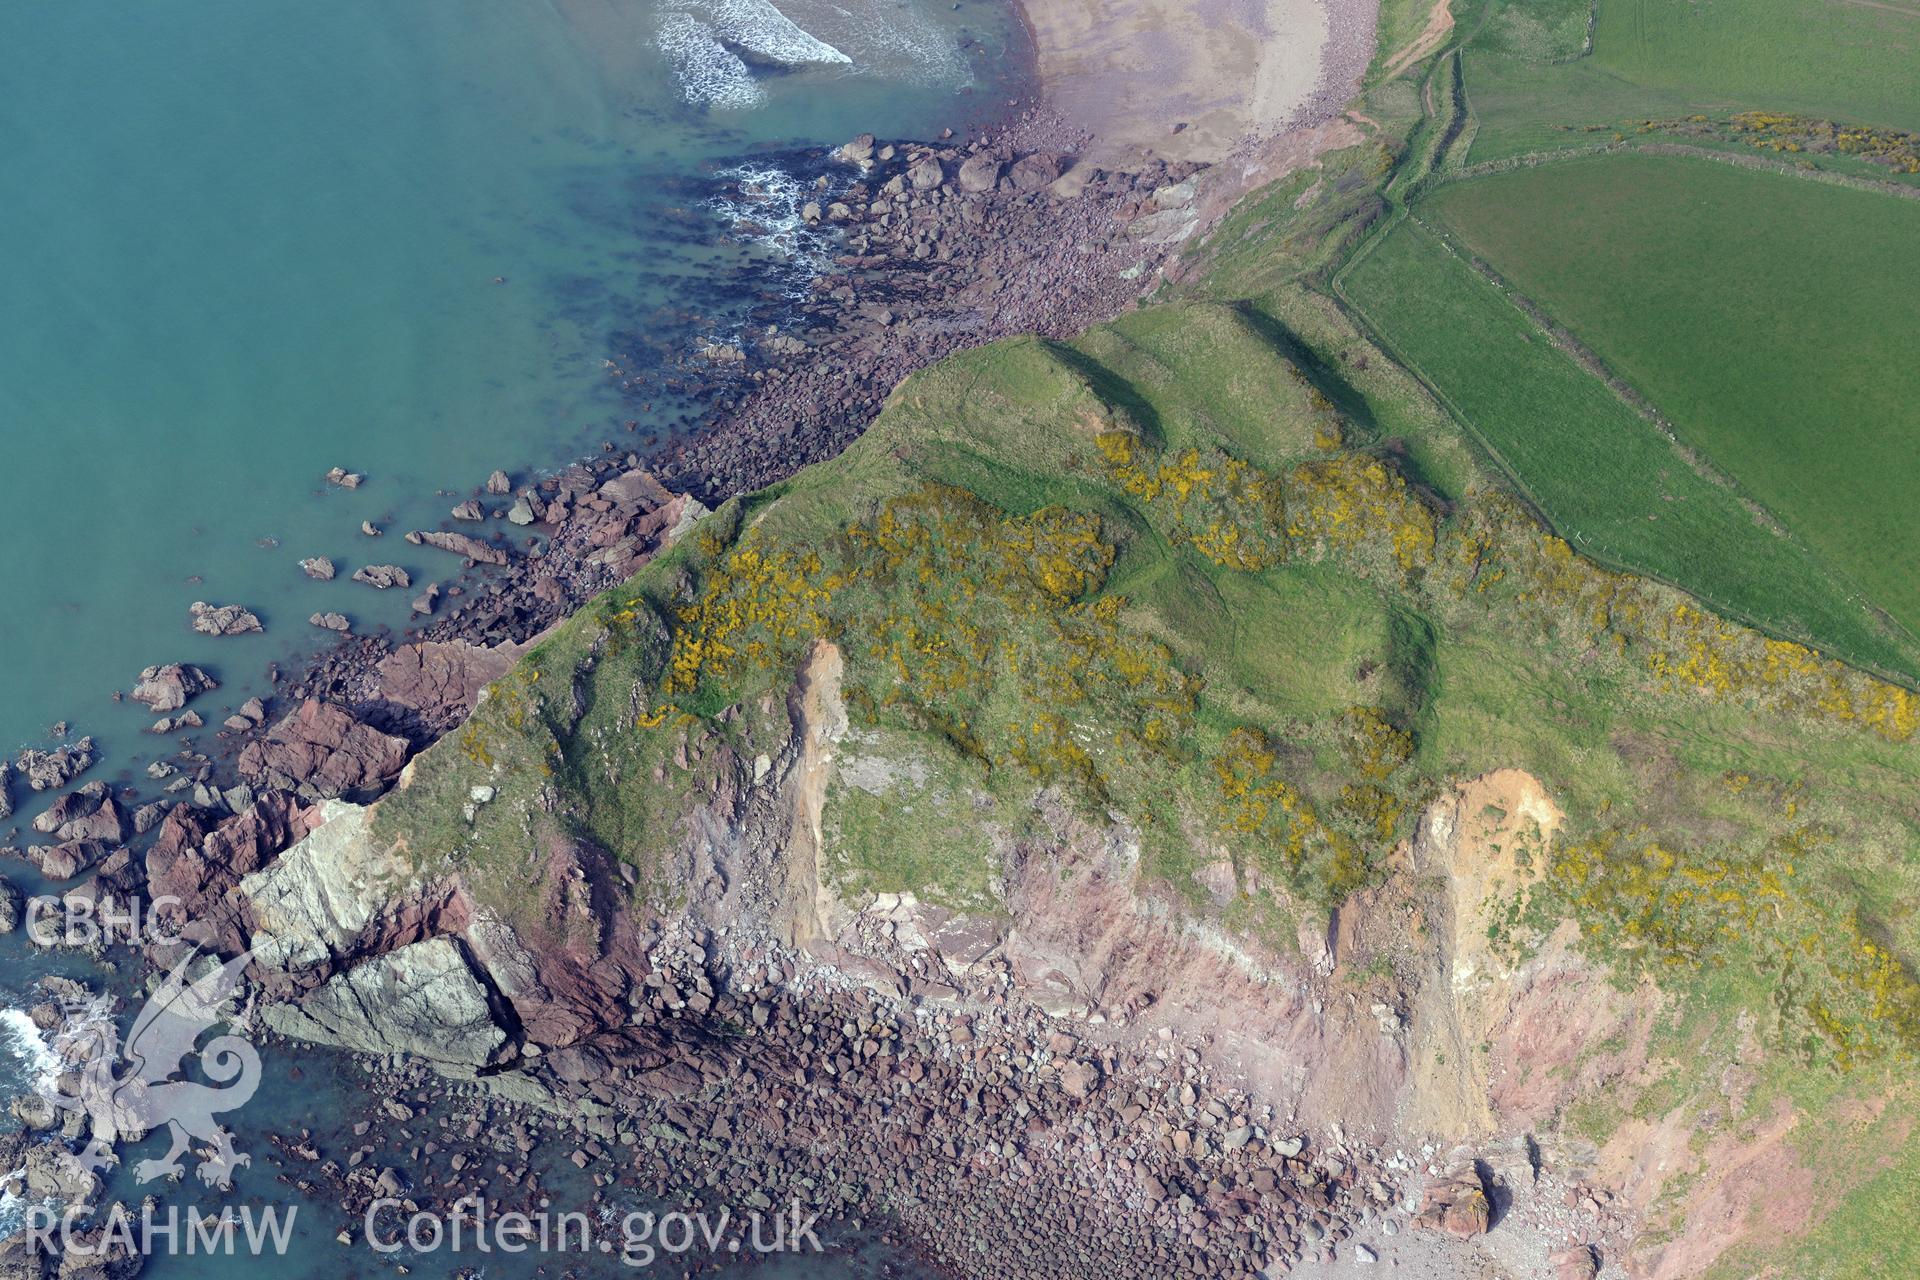 Aerial photography of Great Castle Head taken on 27th March 2017. Baseline aerial reconnaissance survey for the CHERISH Project. ? Crown: CHERISH PROJECT 2017. Produced with EU funds through the Ireland Wales Co-operation Programme 2014-2020. All material made freely available through the Open Government Licence.